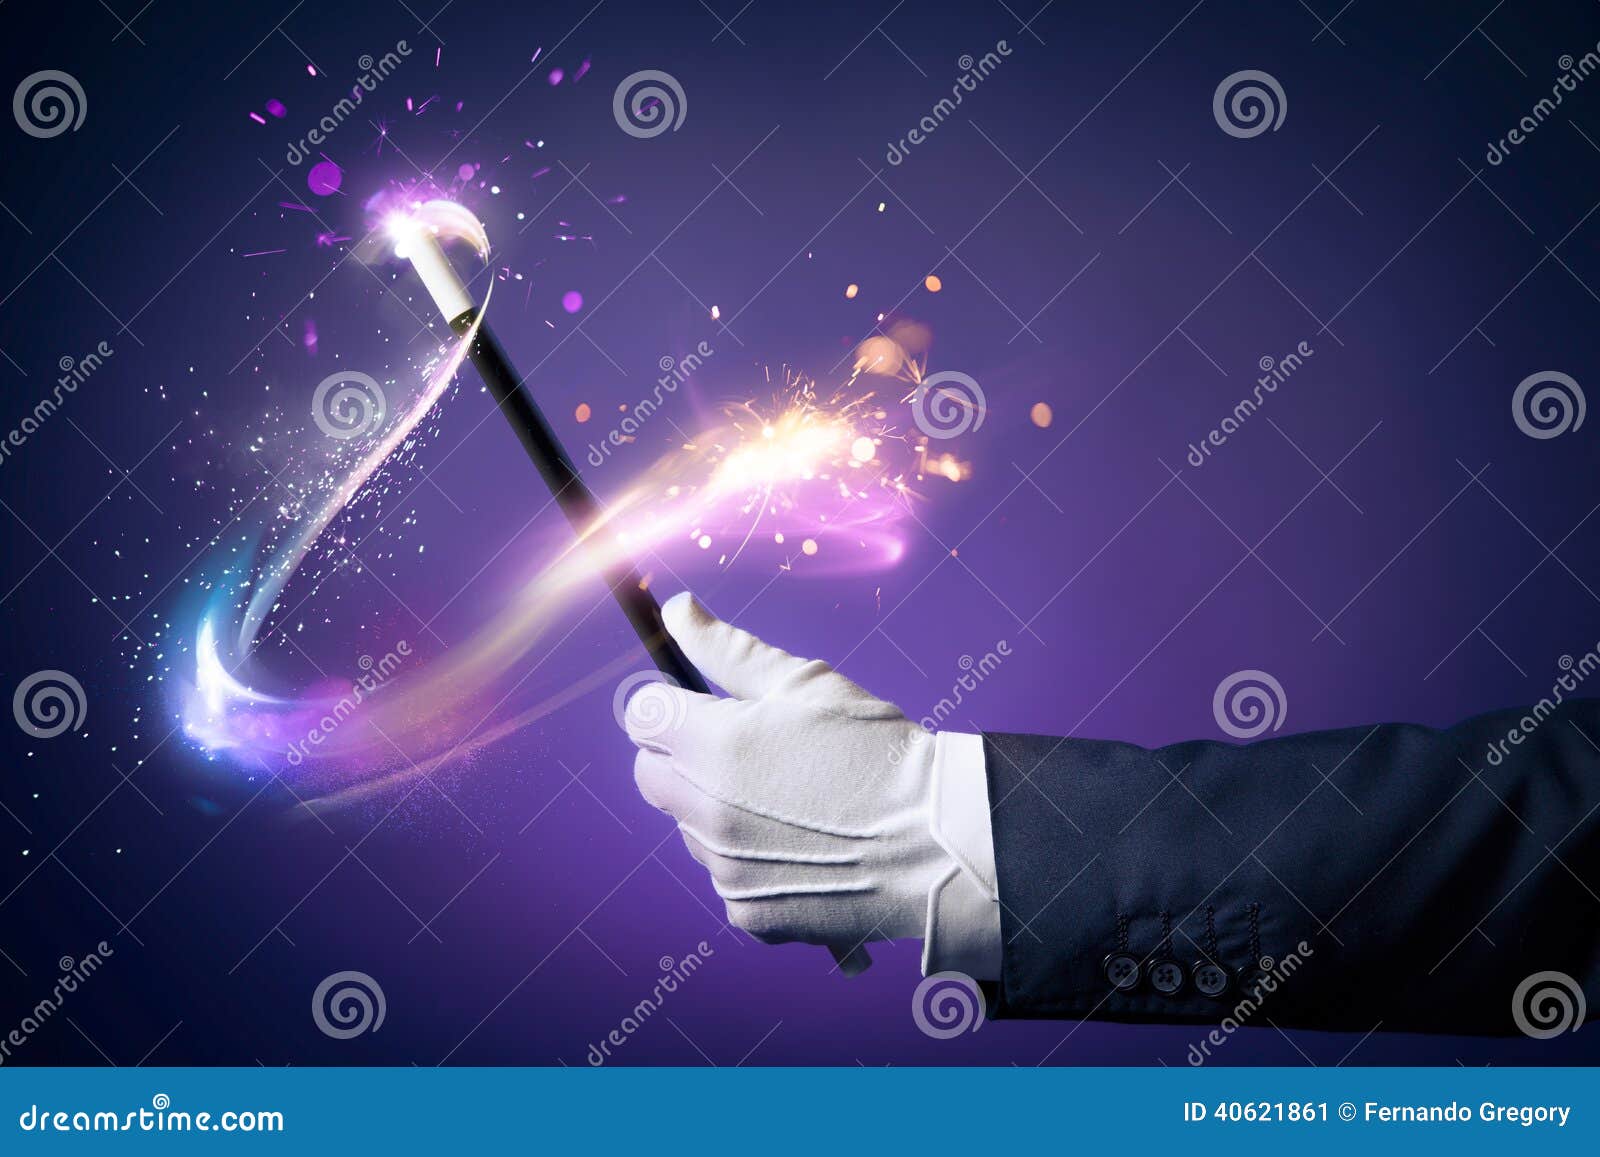 high contrast image of magician hand with magic wand